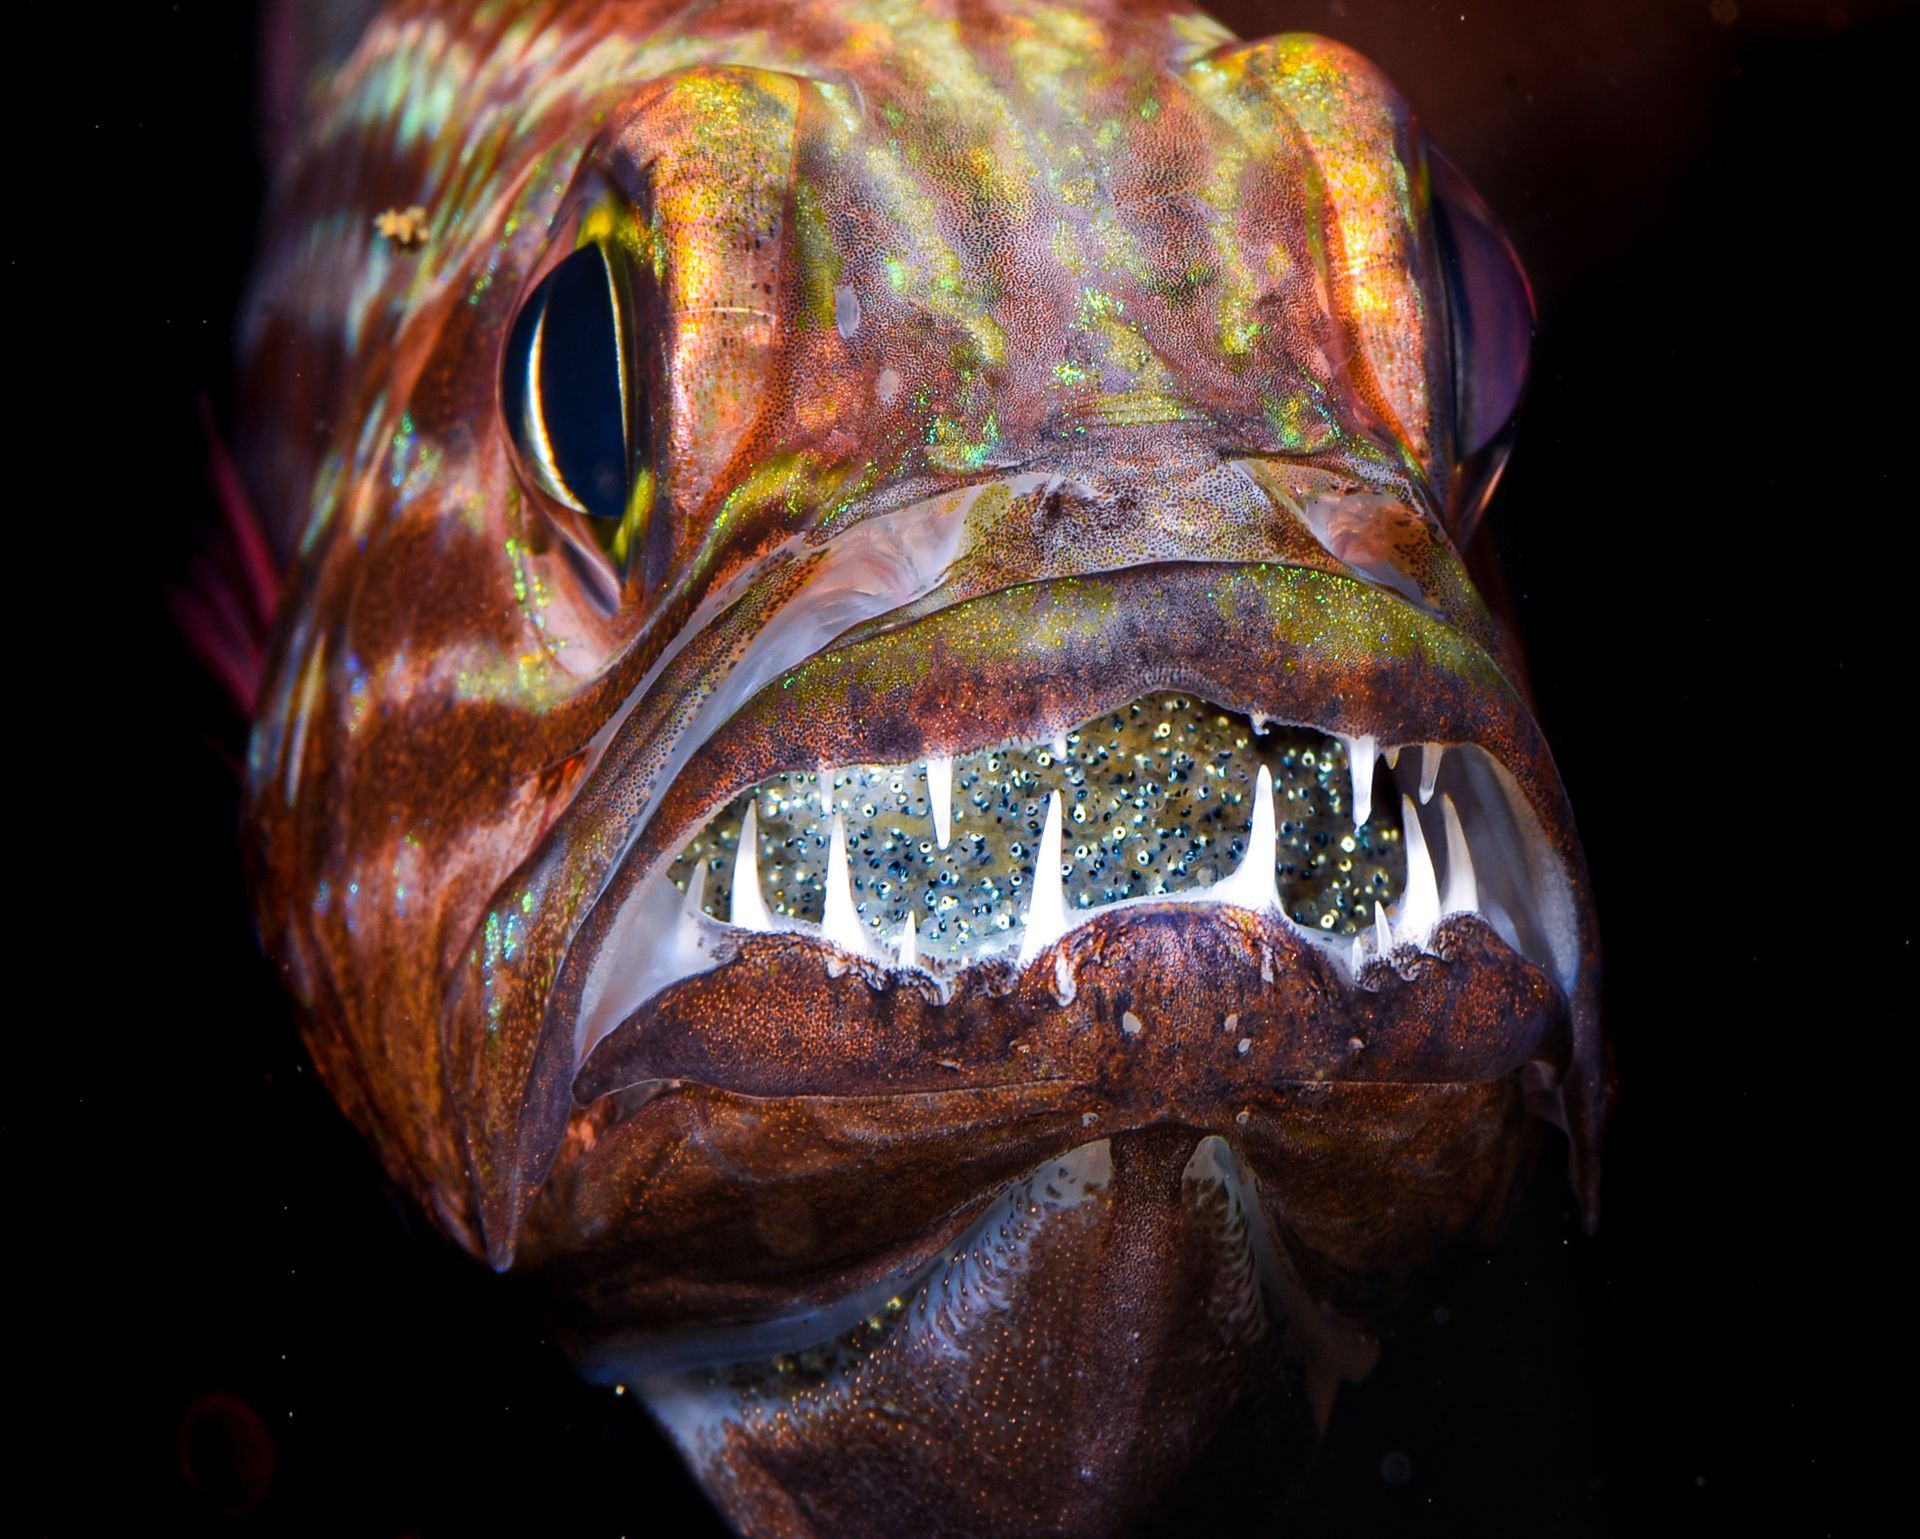 An underwater macro photography image of a male cardinal fish with very sharp elongated teeth holding thousands of glistening eggs in his mouth taken by the Fiji underwater photographer